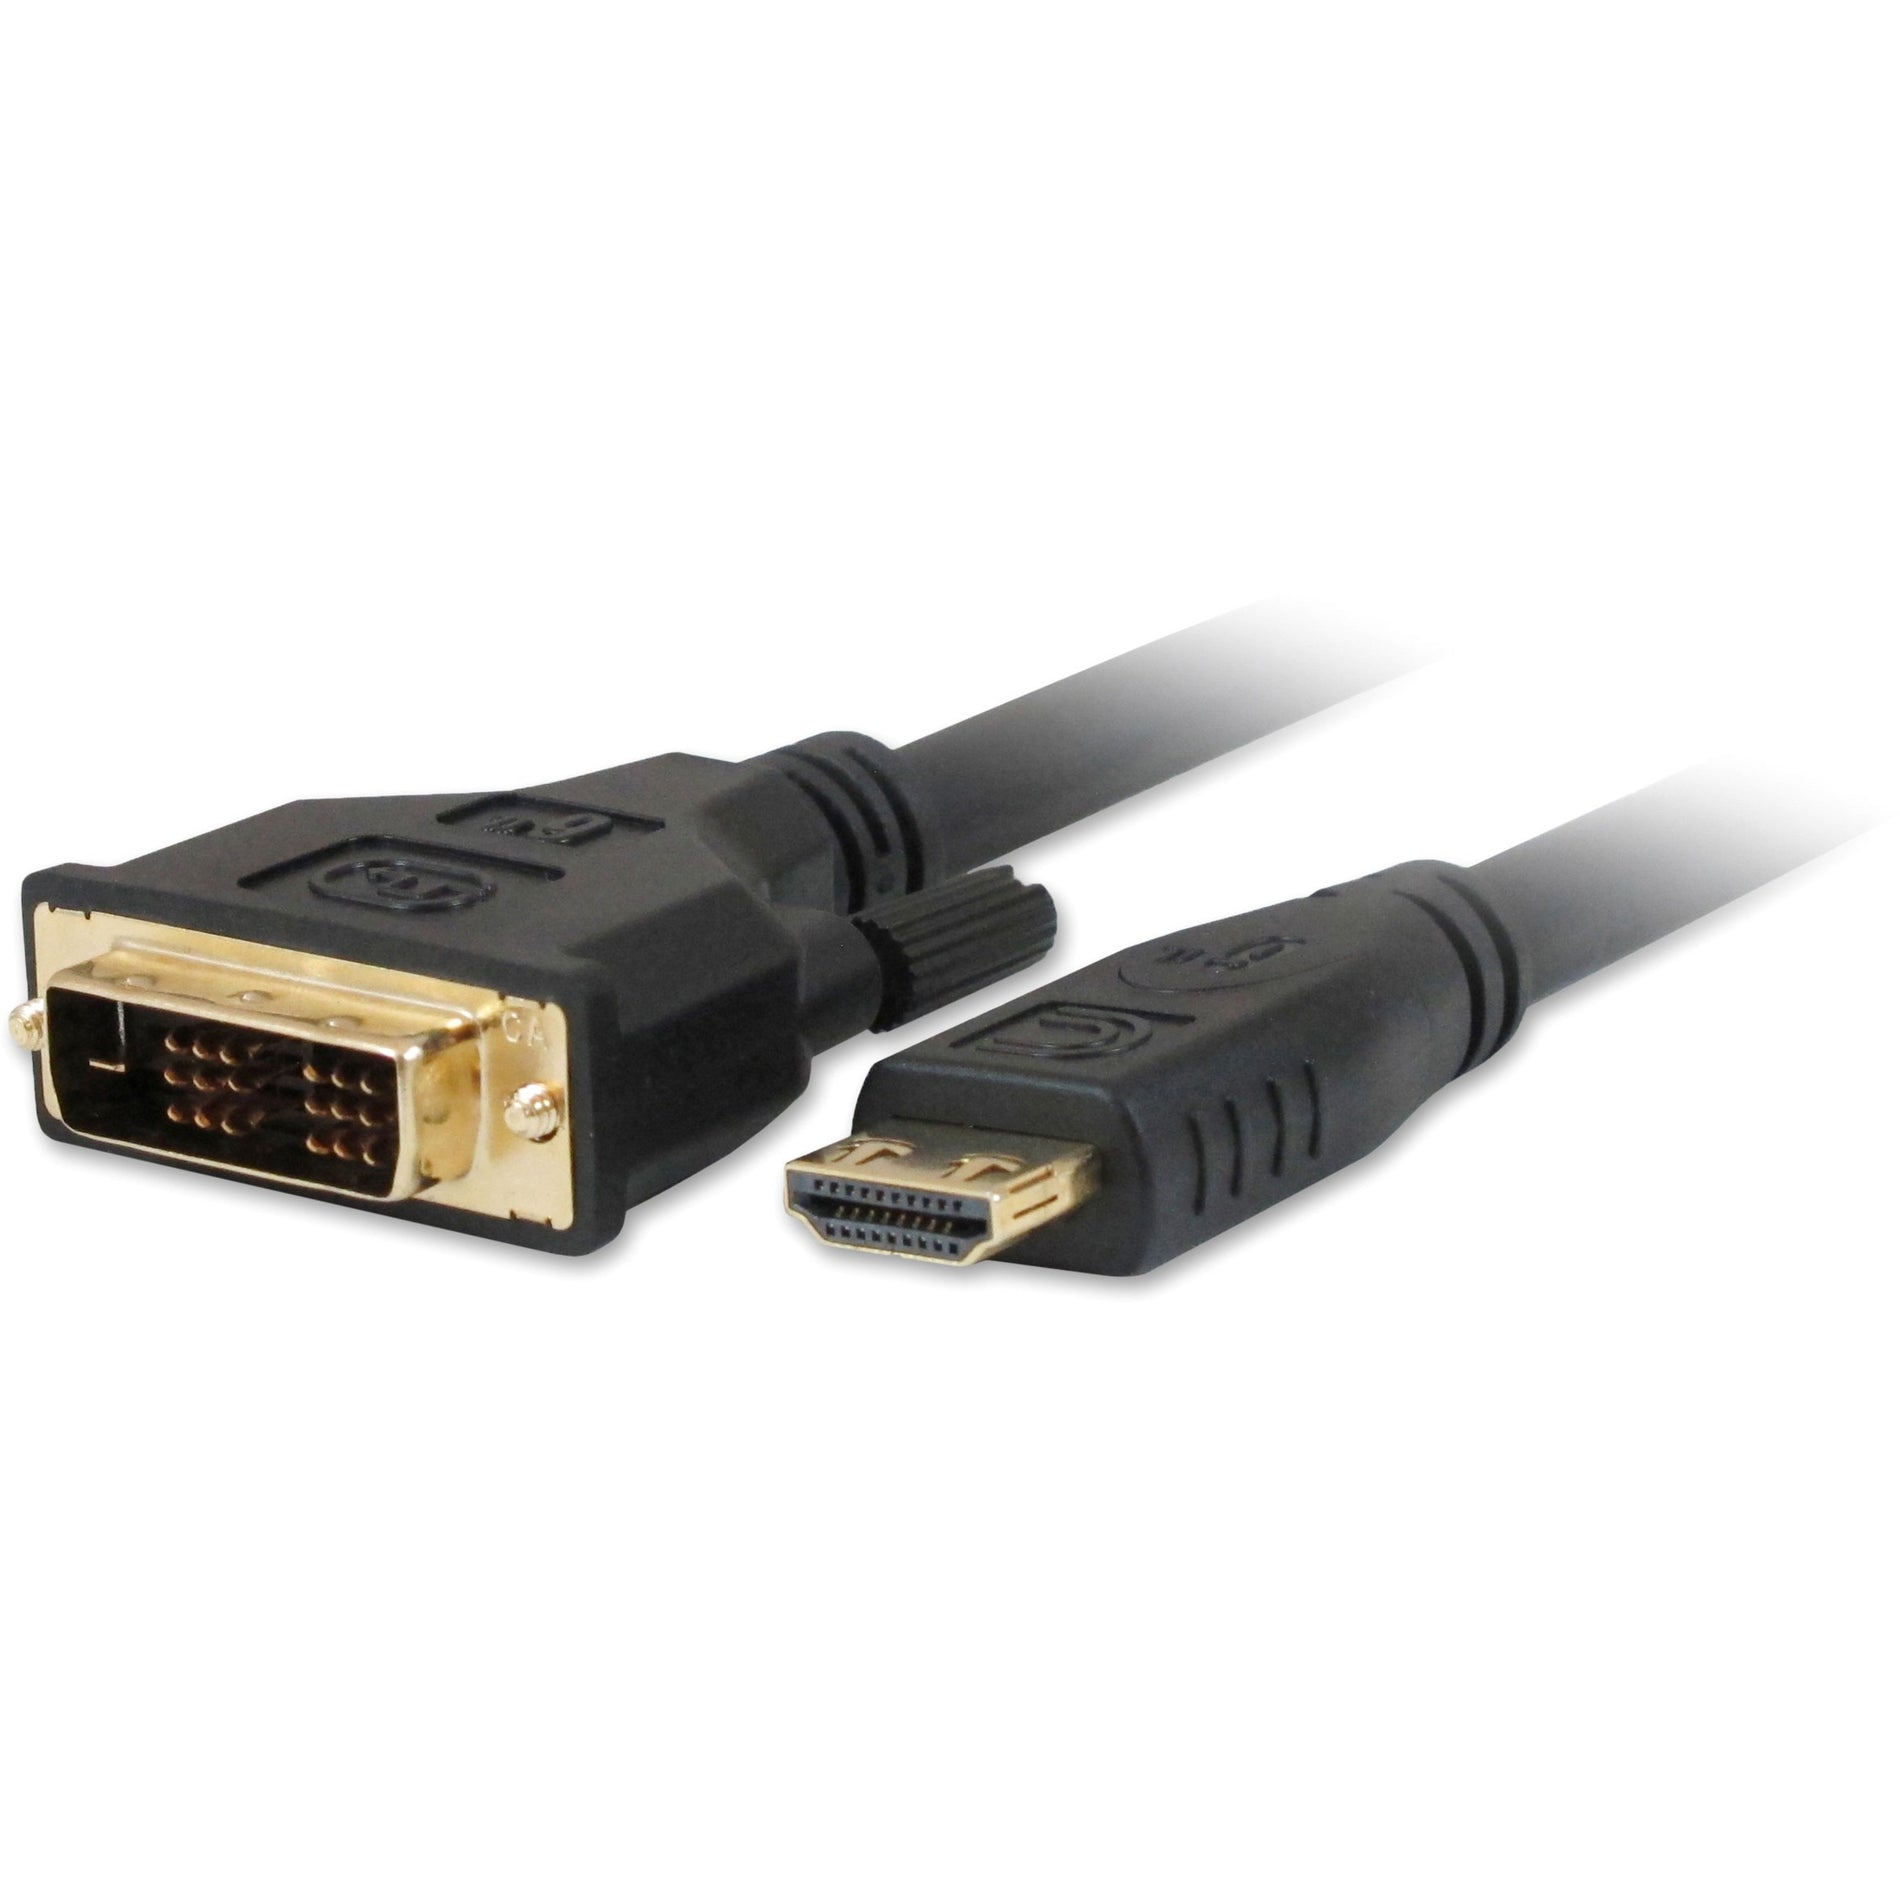 Comprehensive HD-DVI-50PROBLK Pro AV/IT Series HDMI to DVI 24 AWG Cable 50ft, Lifetime Warranty, Strain Relief, EMI/RF Protection, HDCP, SureLength, ProGrip, Molded